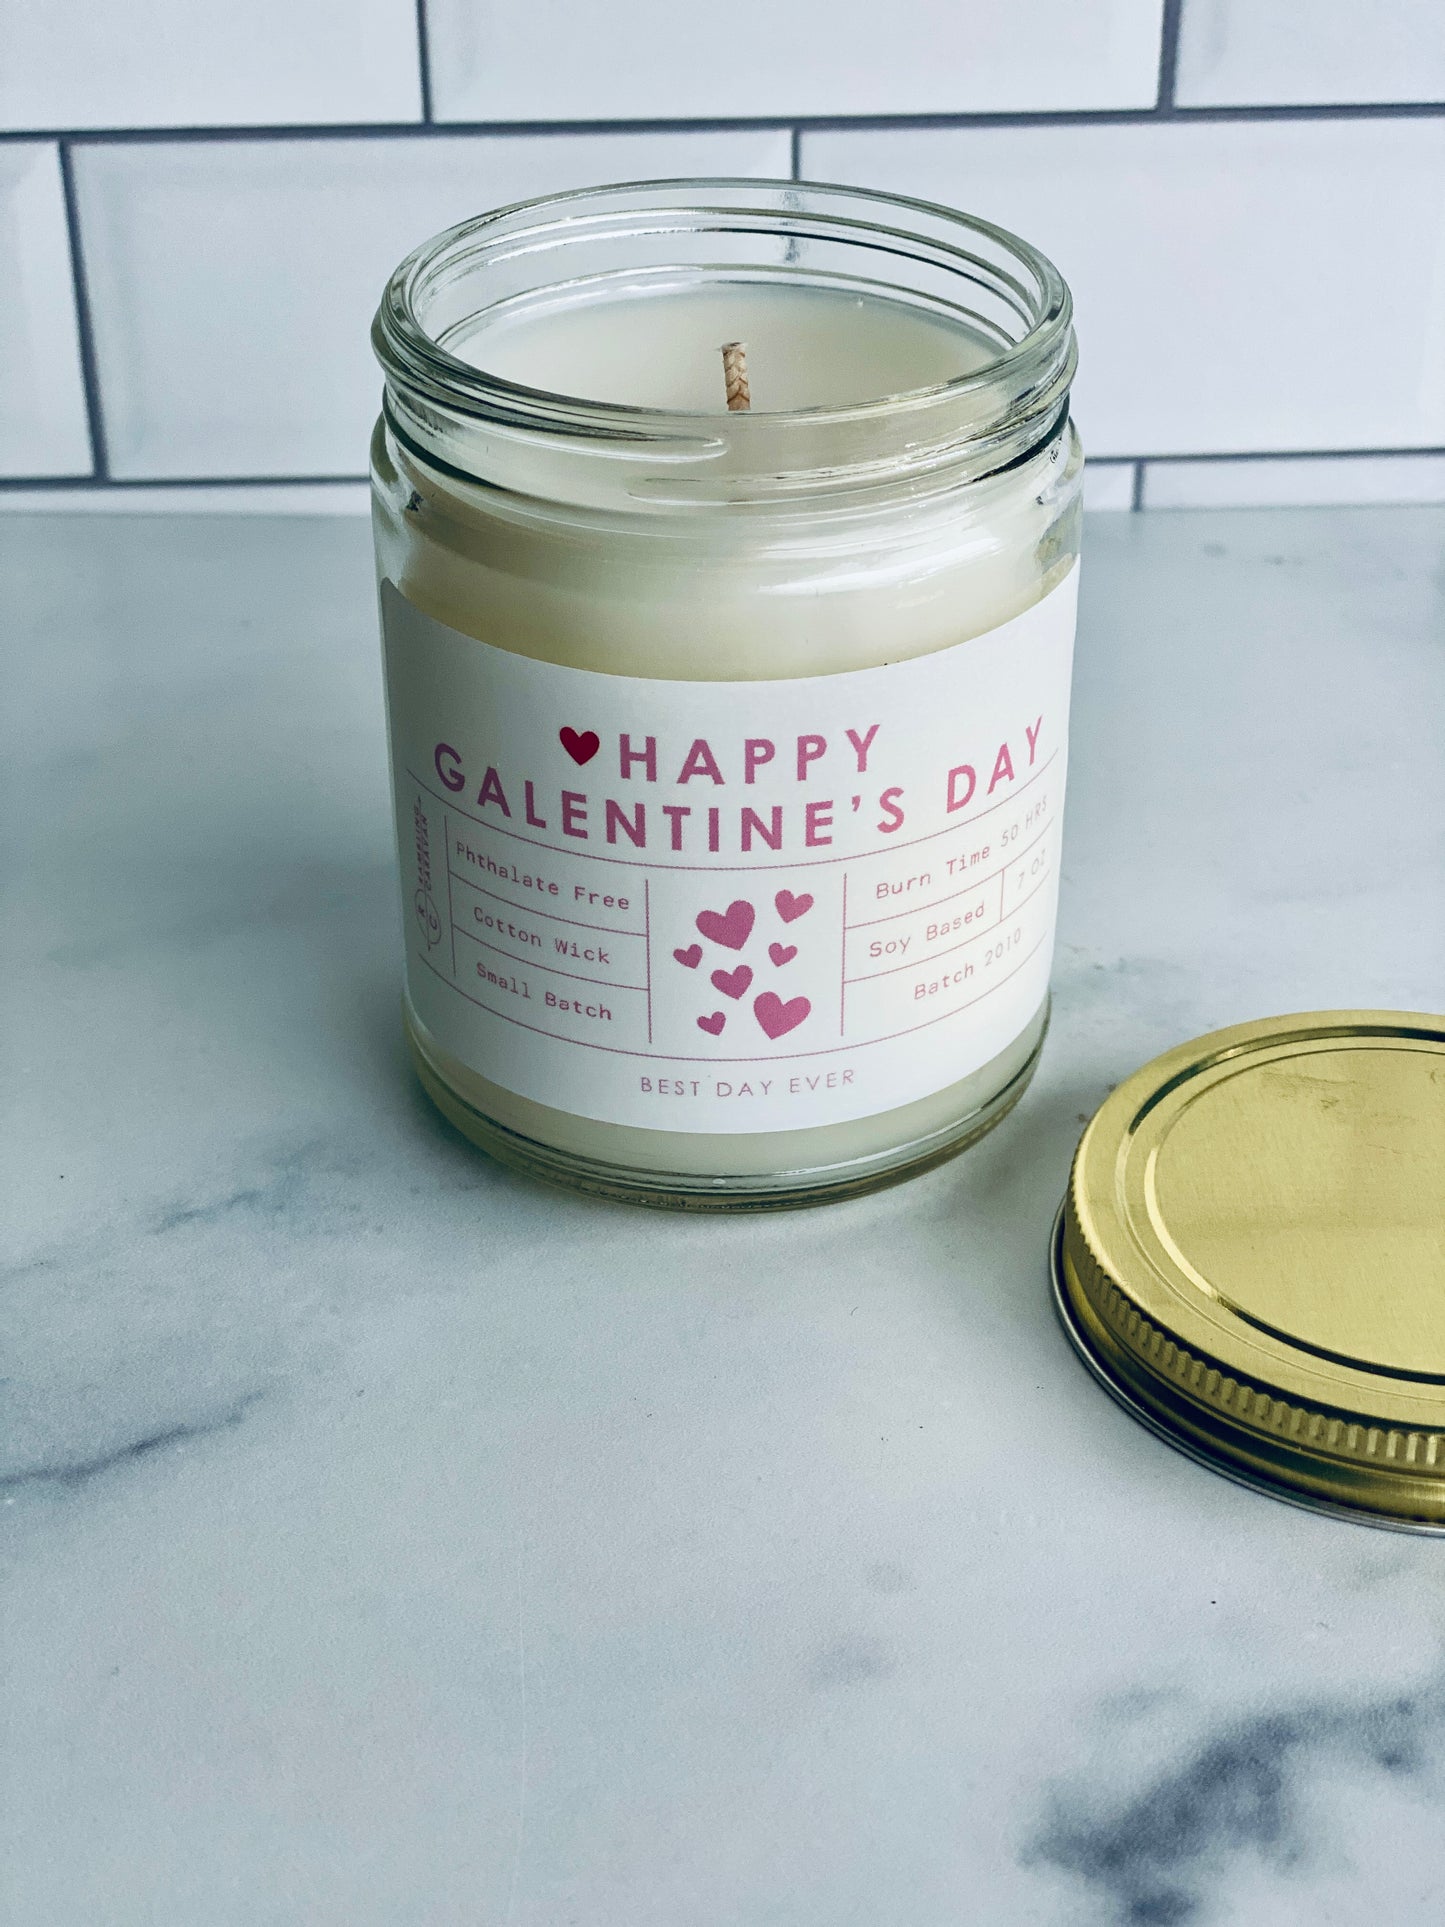 Happy Galentine's Day Candle